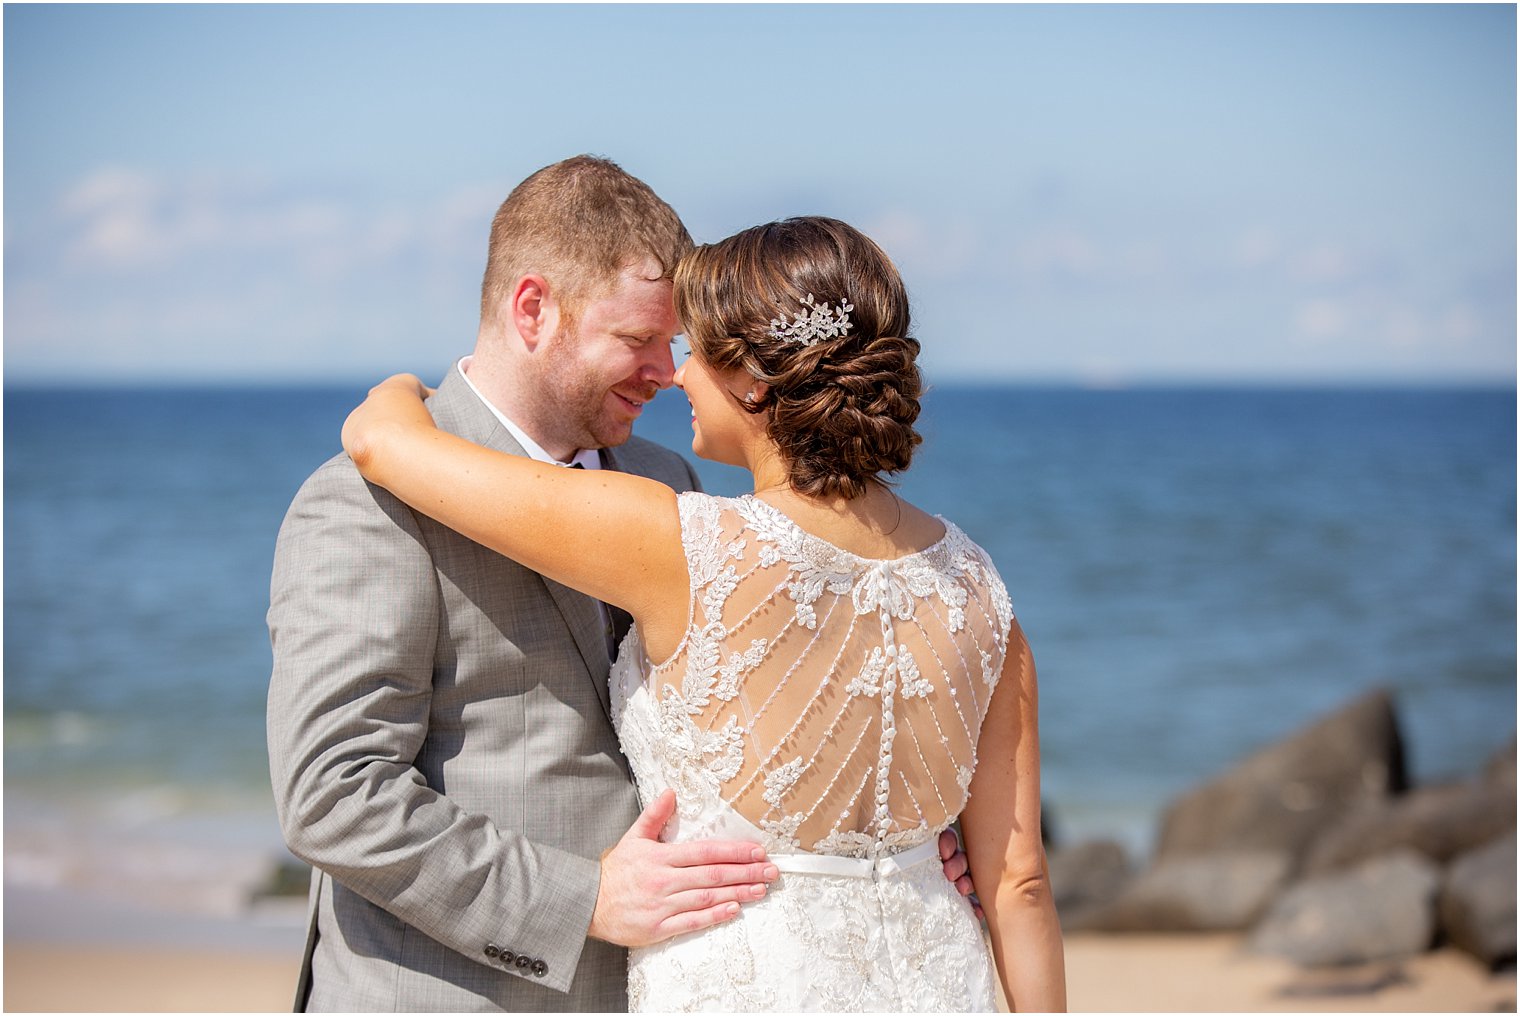 lace details on Maggie Sottero dress photographed on beach at Ocean Place Resort and Spa